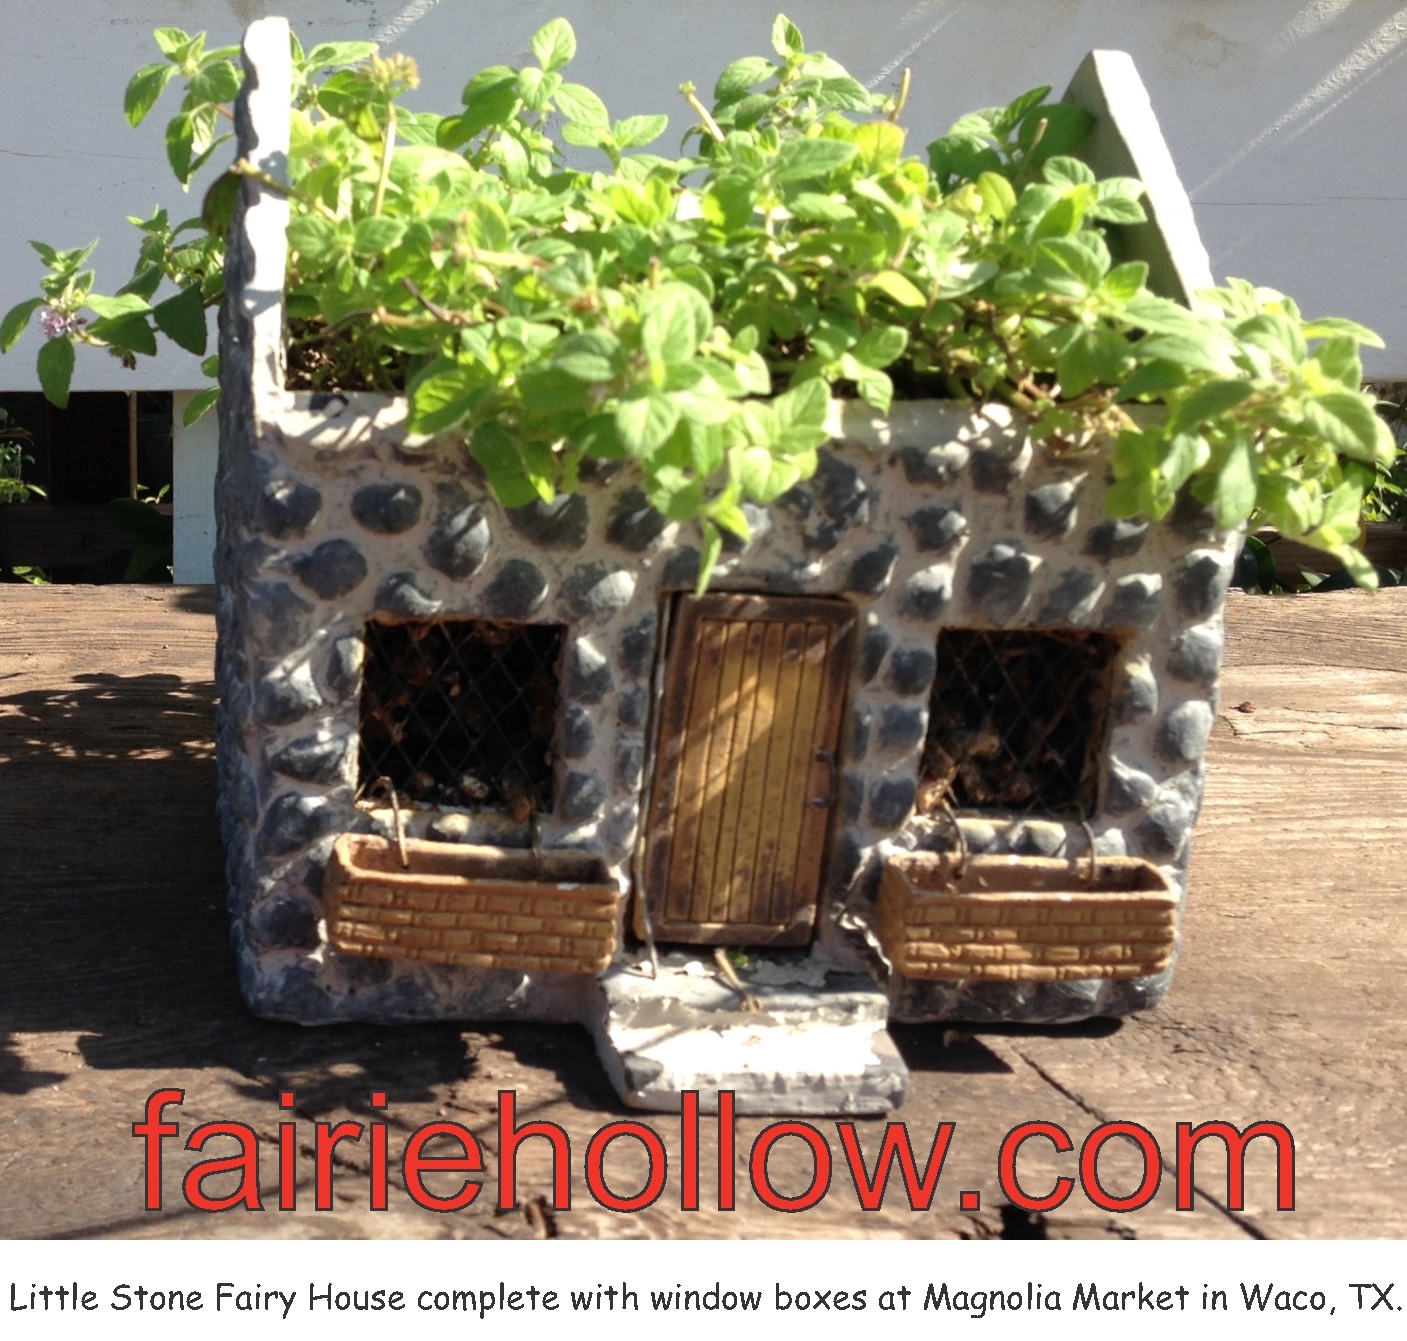 At Magnolia-Market in Waco, Texas, in their fairy garden was a stone fairy house with a planted roof | fairiehollow.com